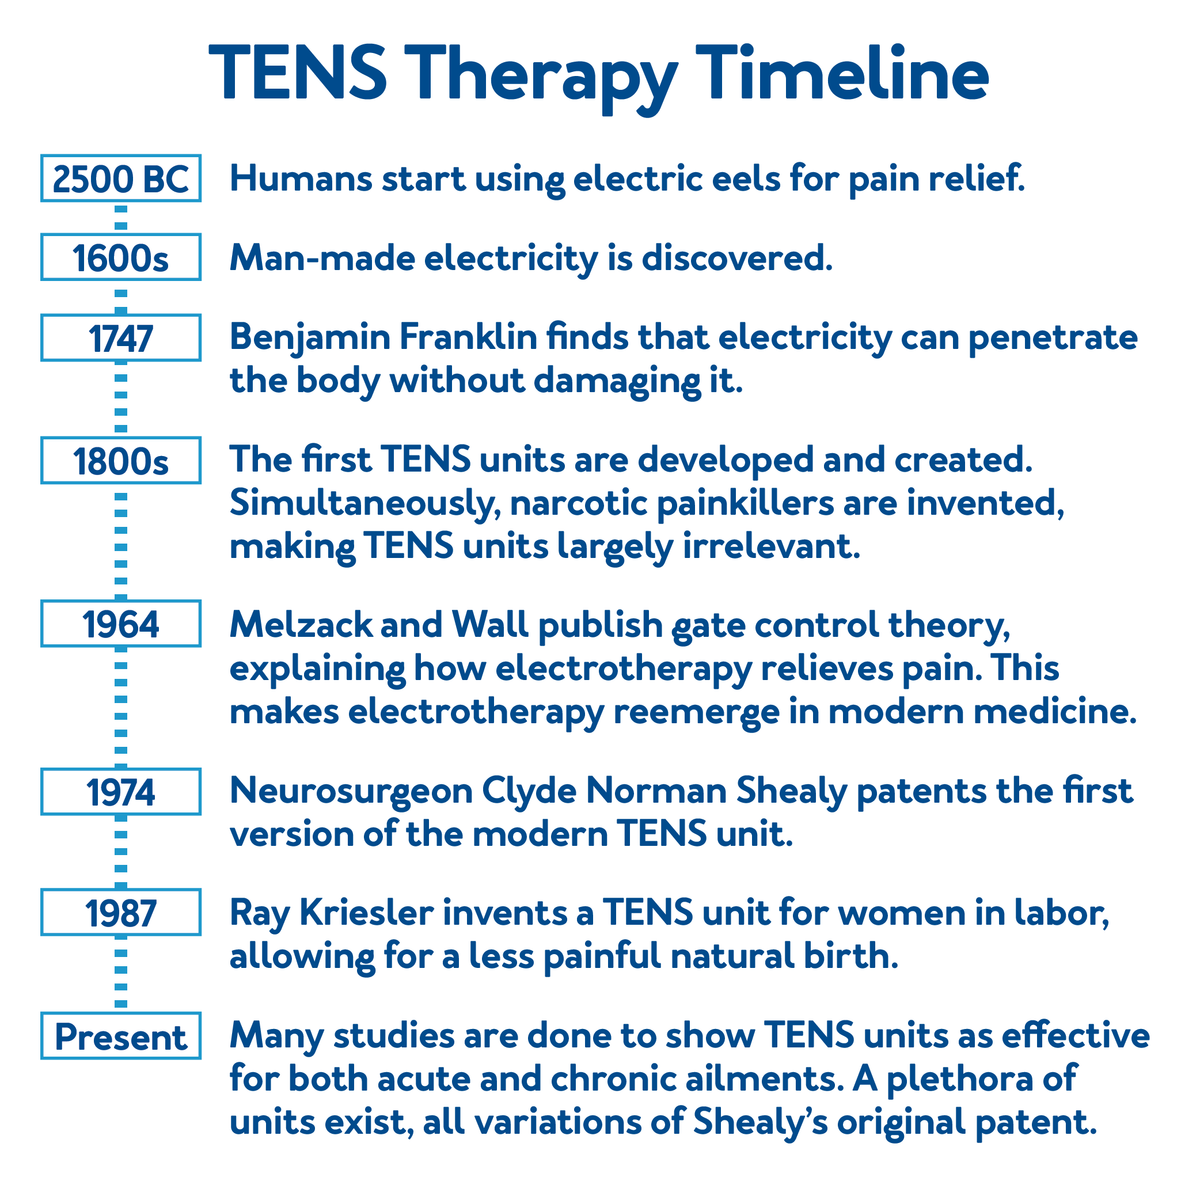 TENS Therapy Timeline